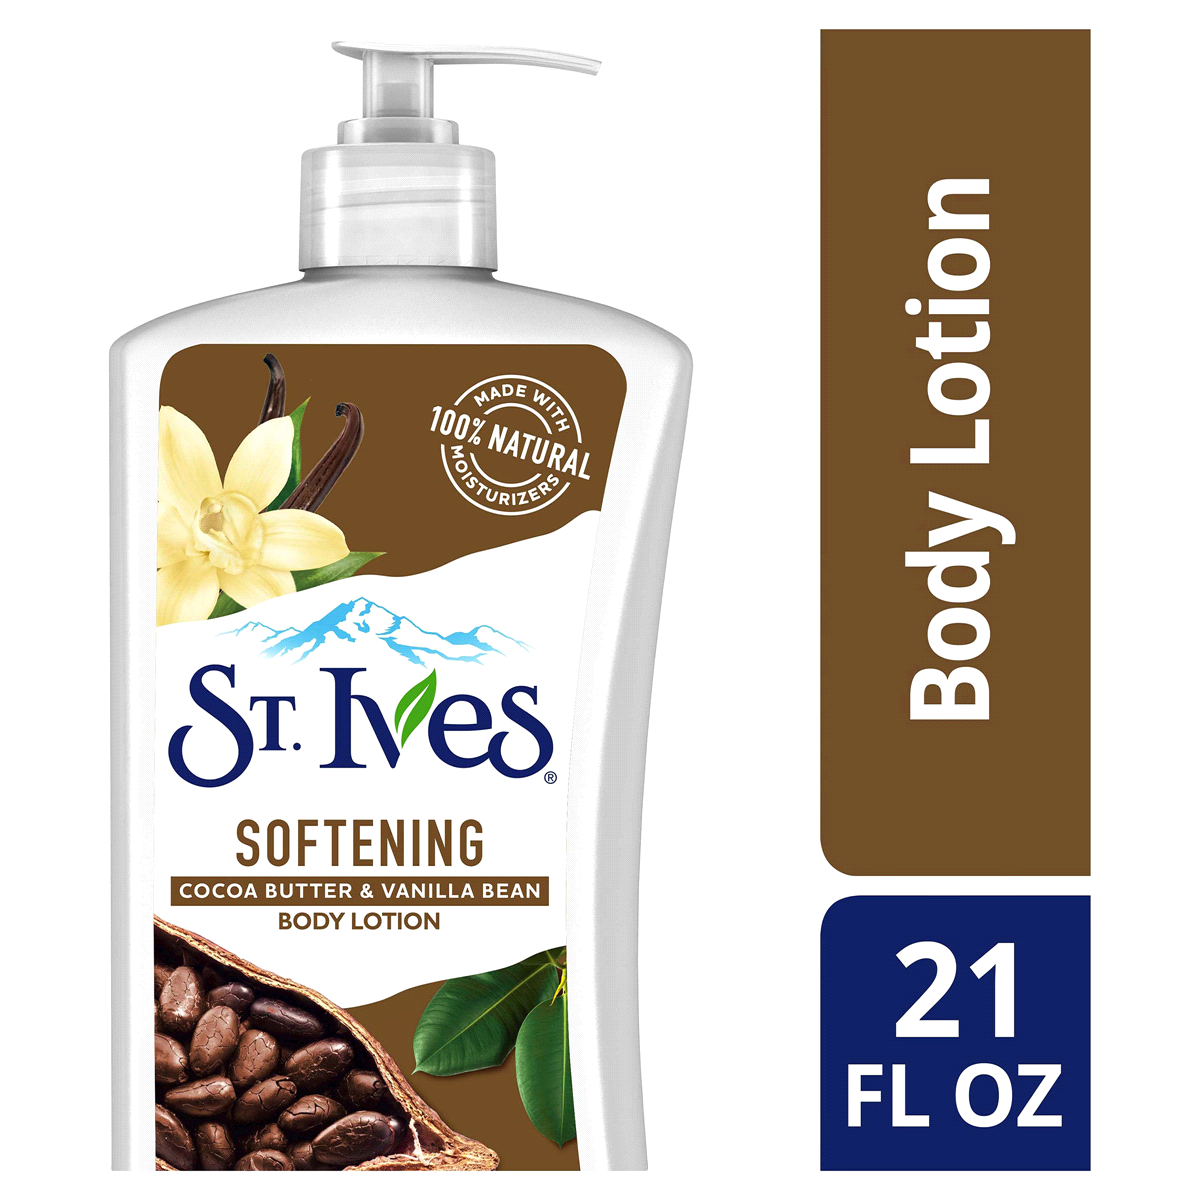 ST IVES LOTION SOFTENING COCOA BUTTER